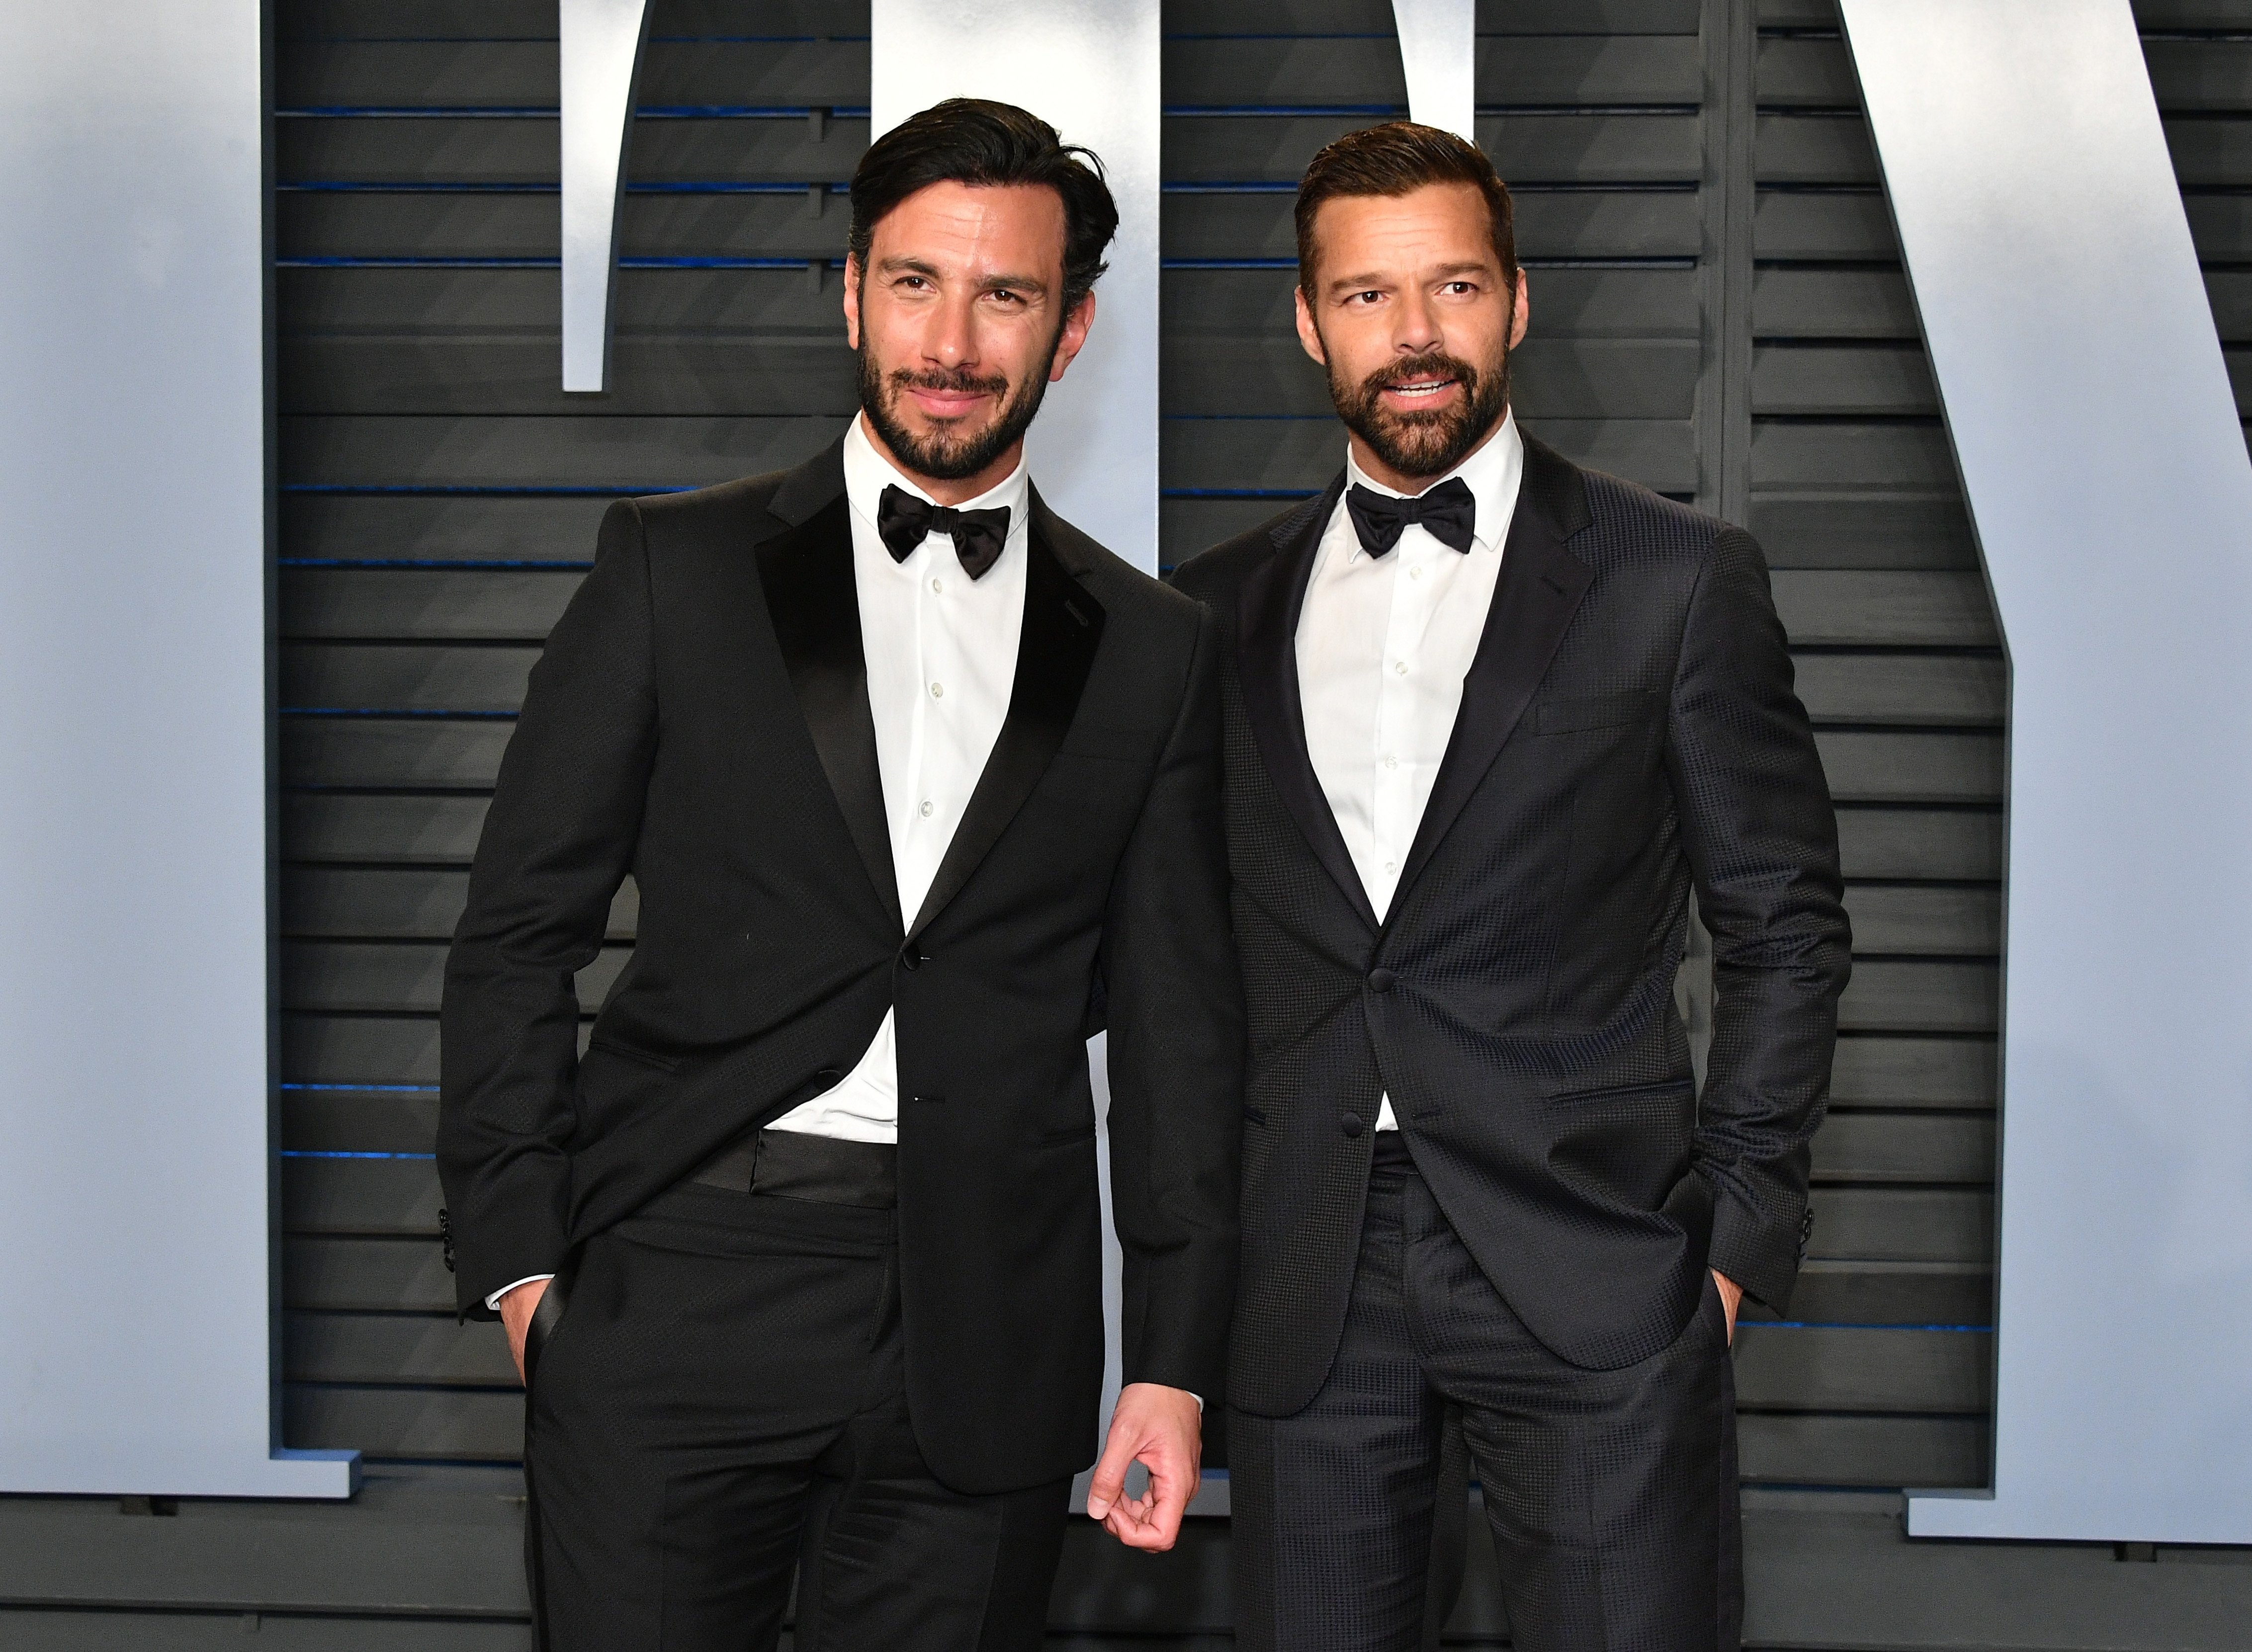 Jwan Yosef and Ricky Martin at the 2018 Vanity Fair Oscar Party on March 4, 2018 | Photo: GettyImages